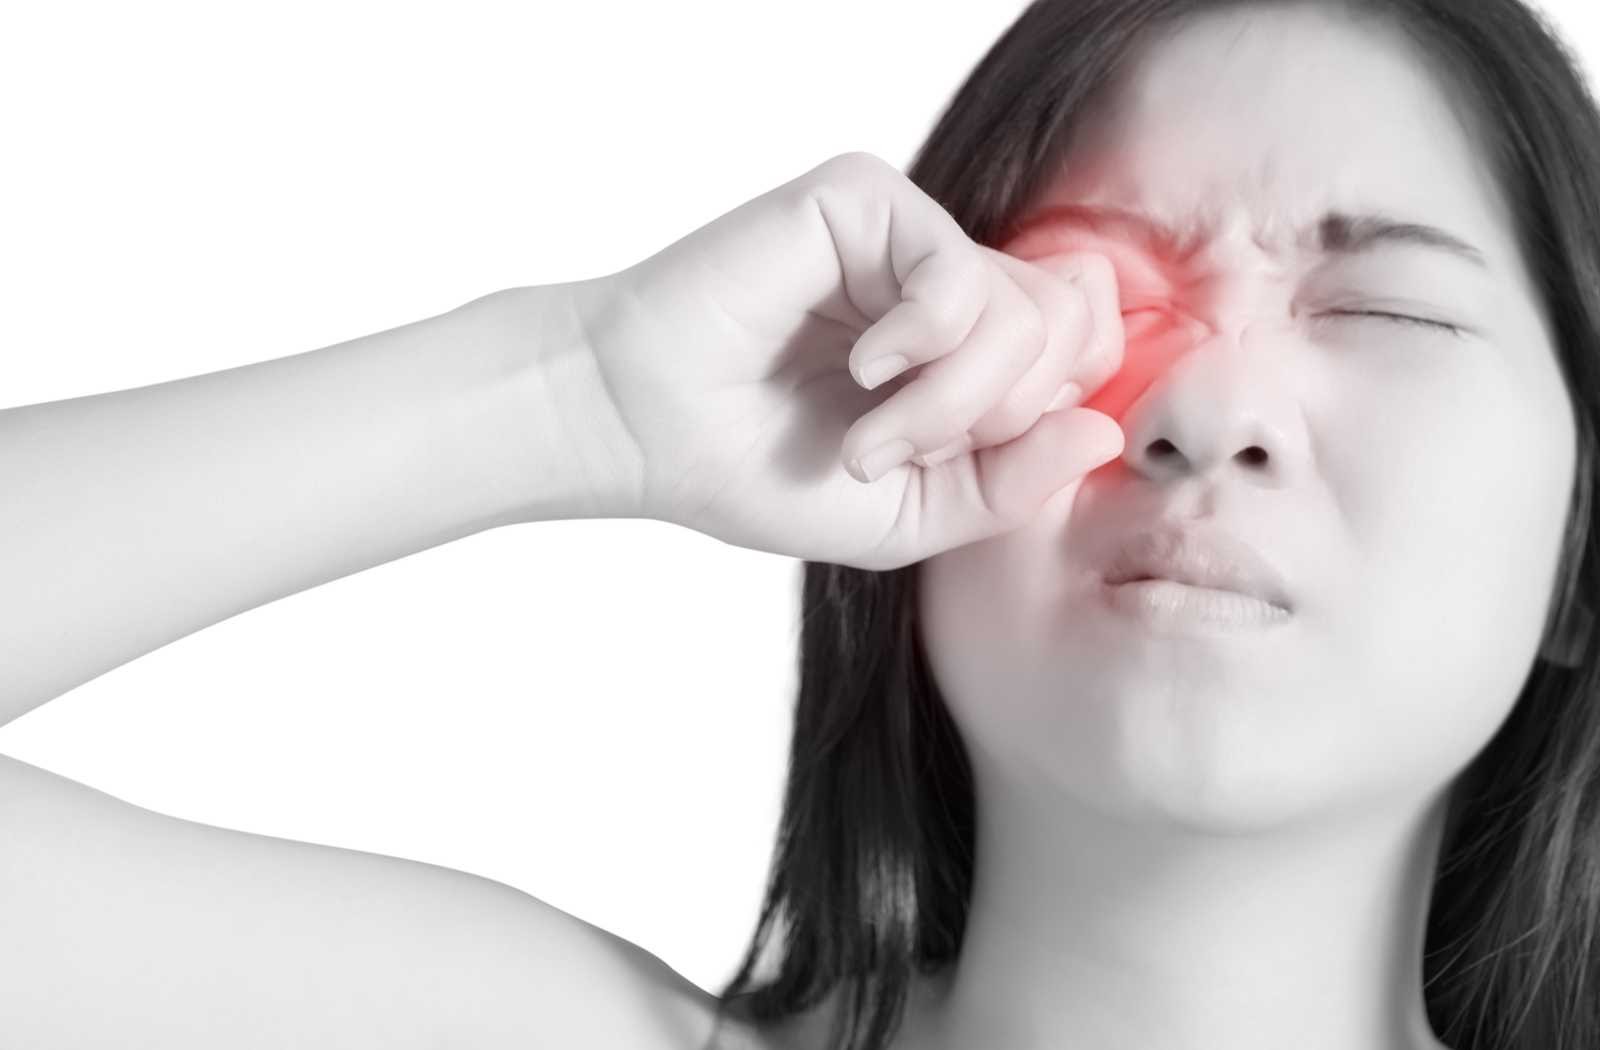 black and white photo of woman experiencing painful eye disease symptoms glowing red